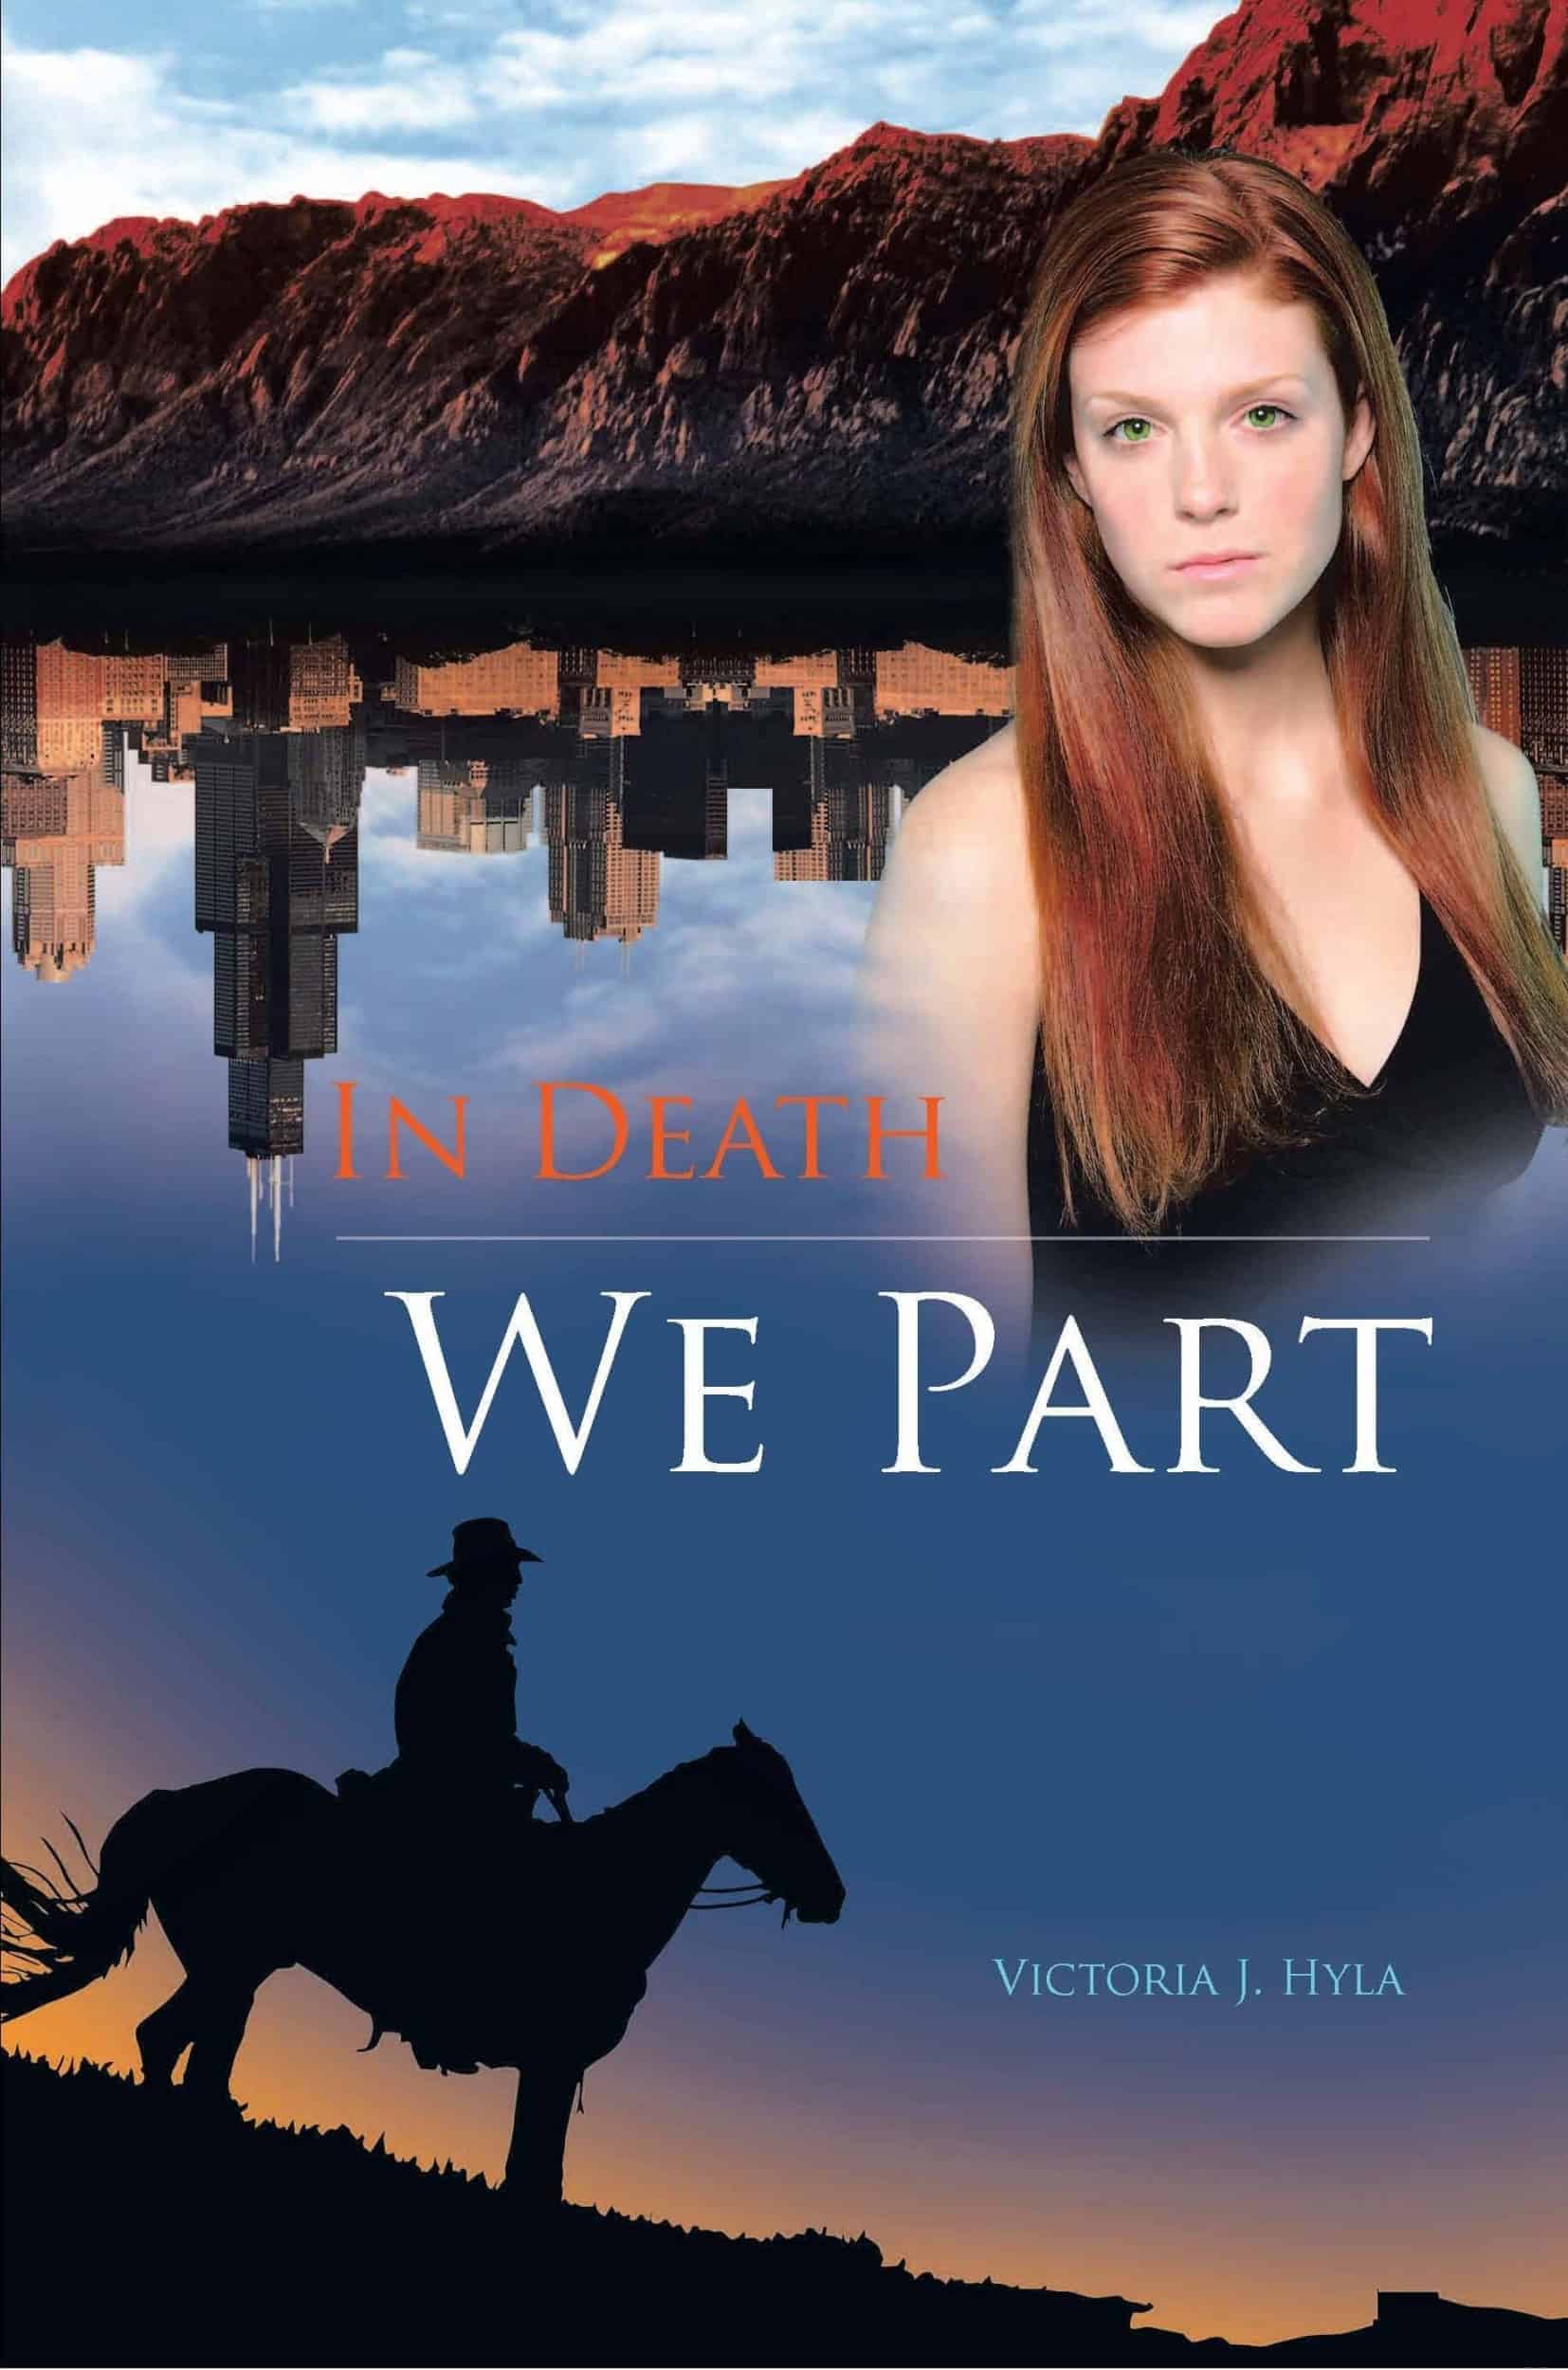 This In Death We Part (Romance Novel, Book 1 of the Hearts Drawn Wyld trilogy) is made with love by Victoria J. Hyla (Author)/Victorious Editing Services! Shop more unique gift ideas today with Spots Initiatives, the best way to support creators.